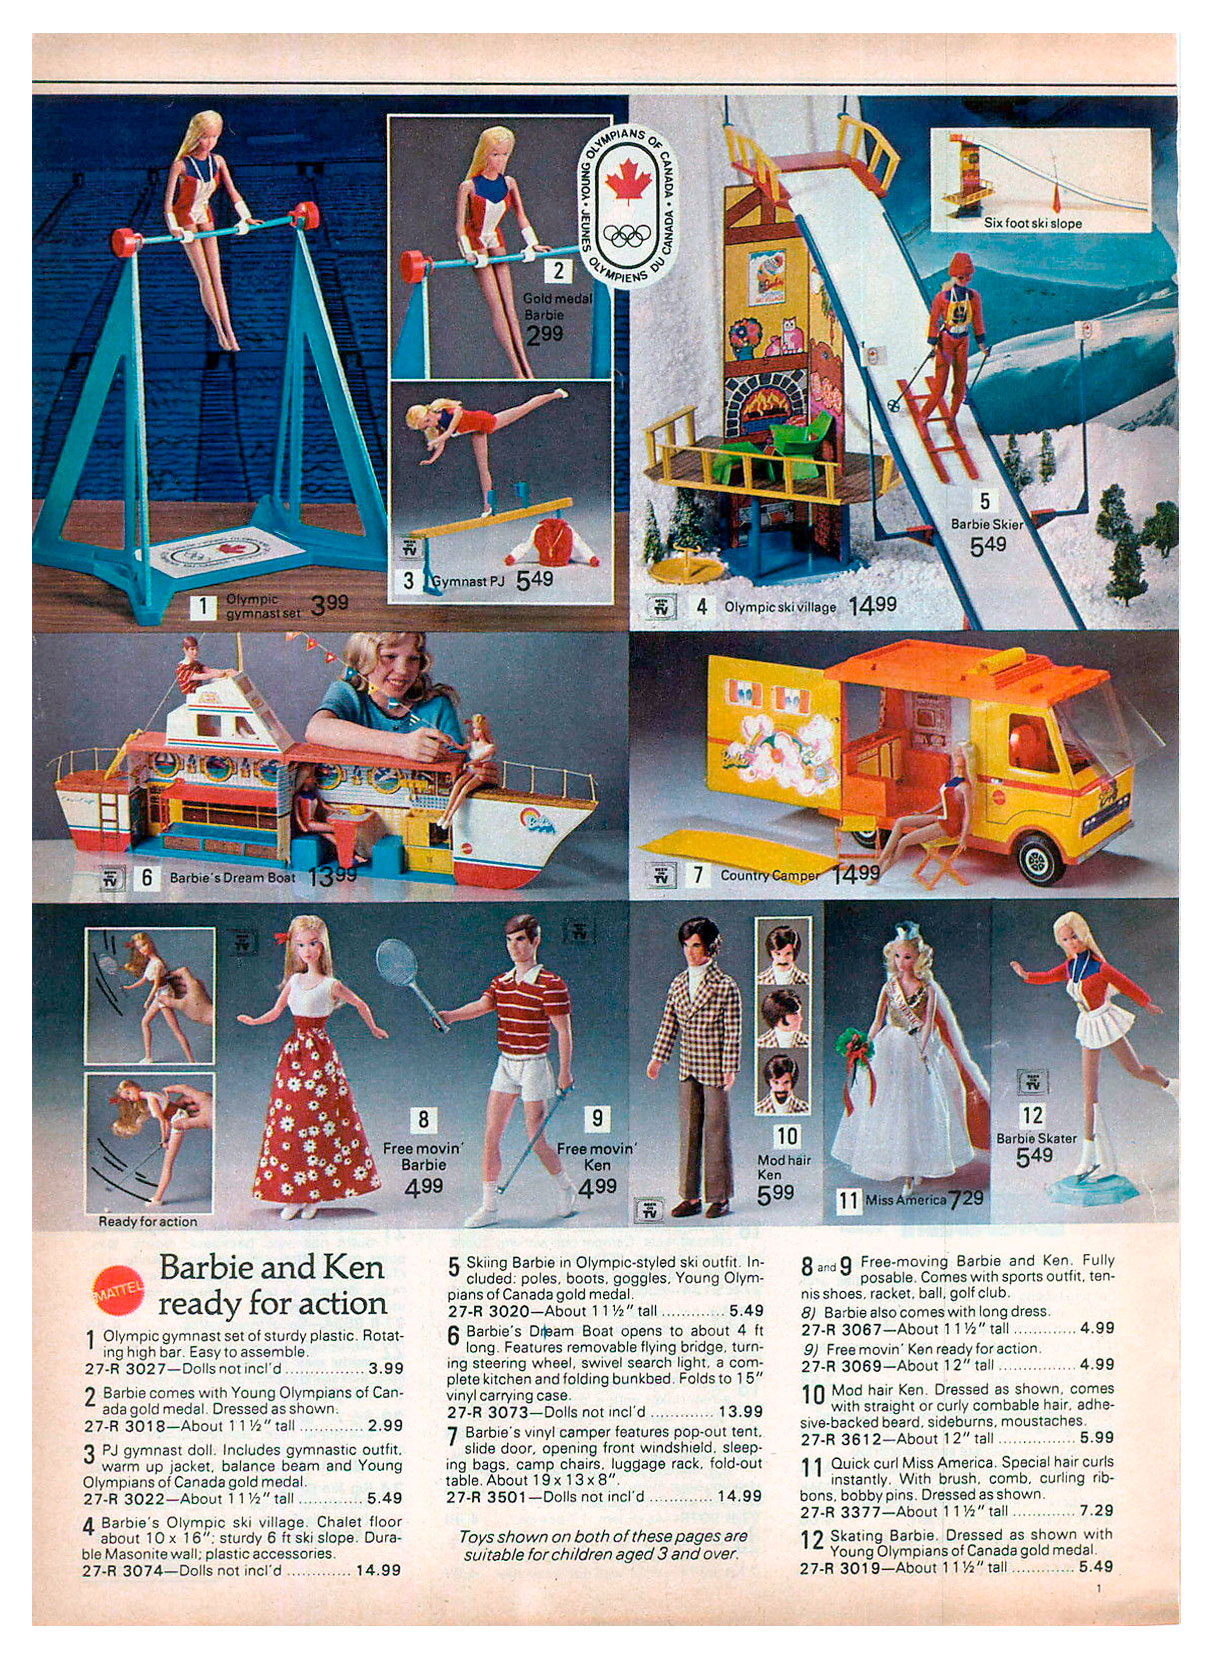 From 1975 Eaton's Christmas catalogue